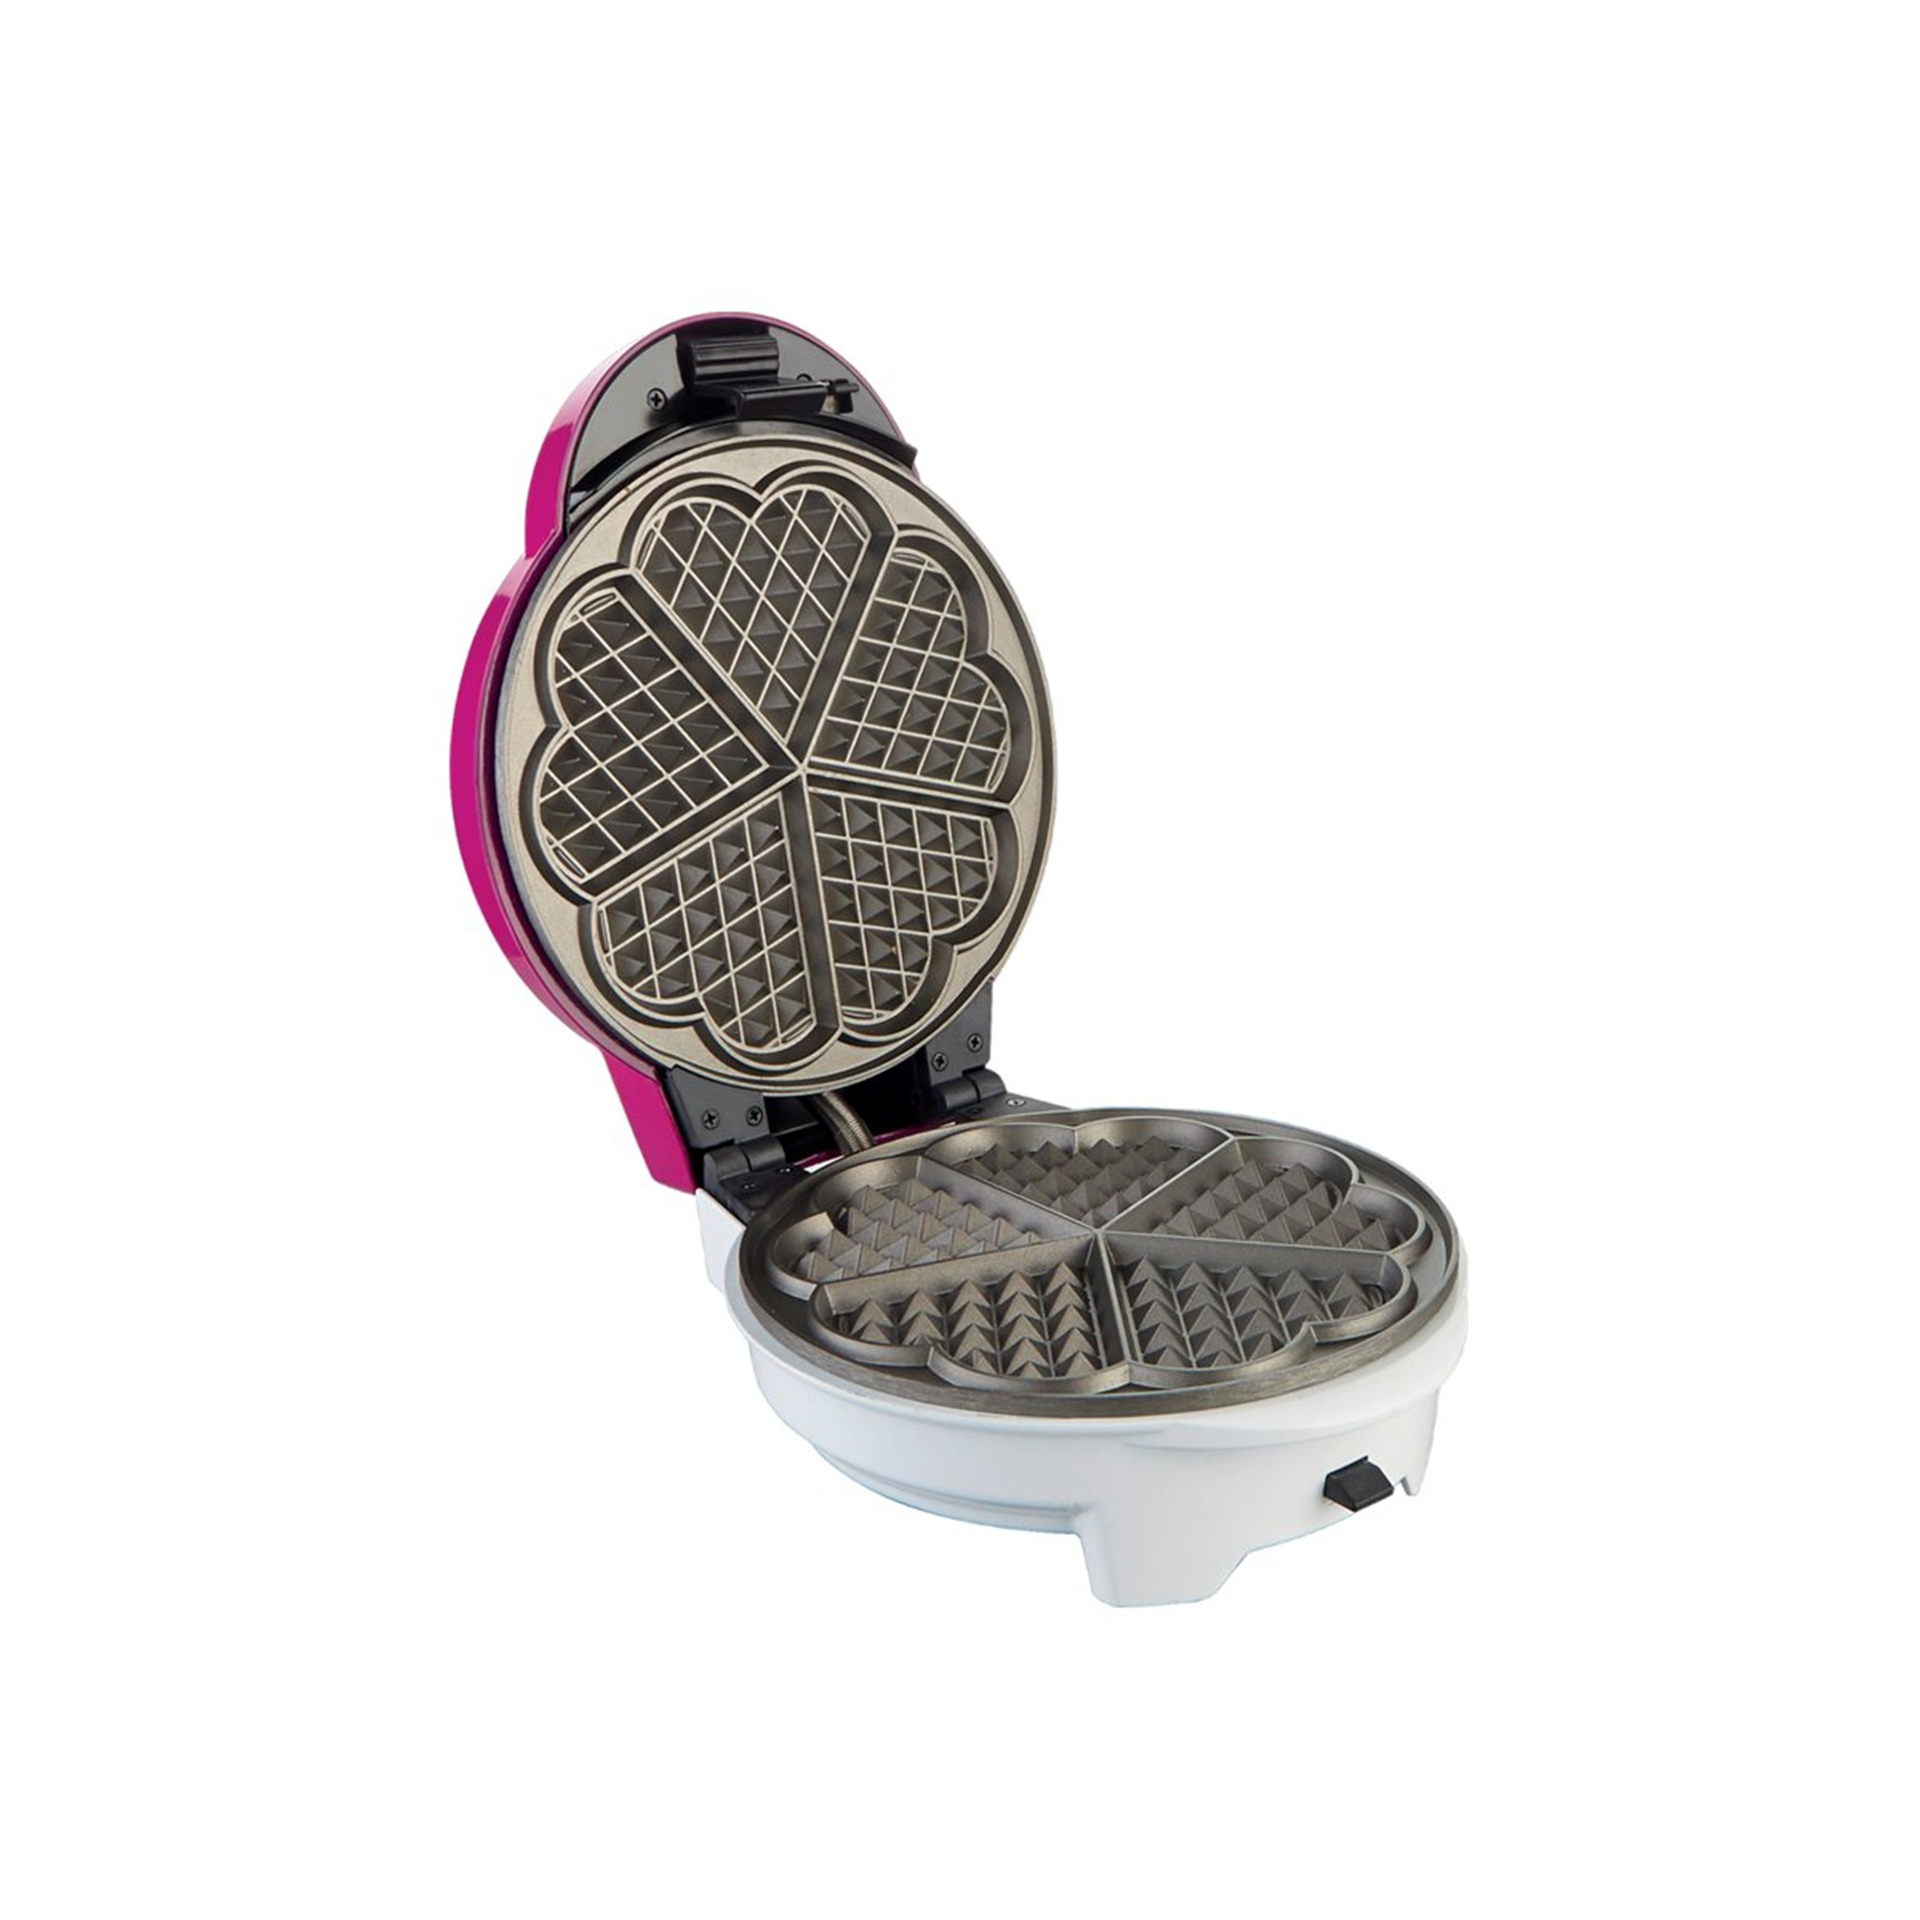 Gorenje Waffle maker WCM702PR Number of pastry 1 Heart waffle and cupcakes 700 W Purple